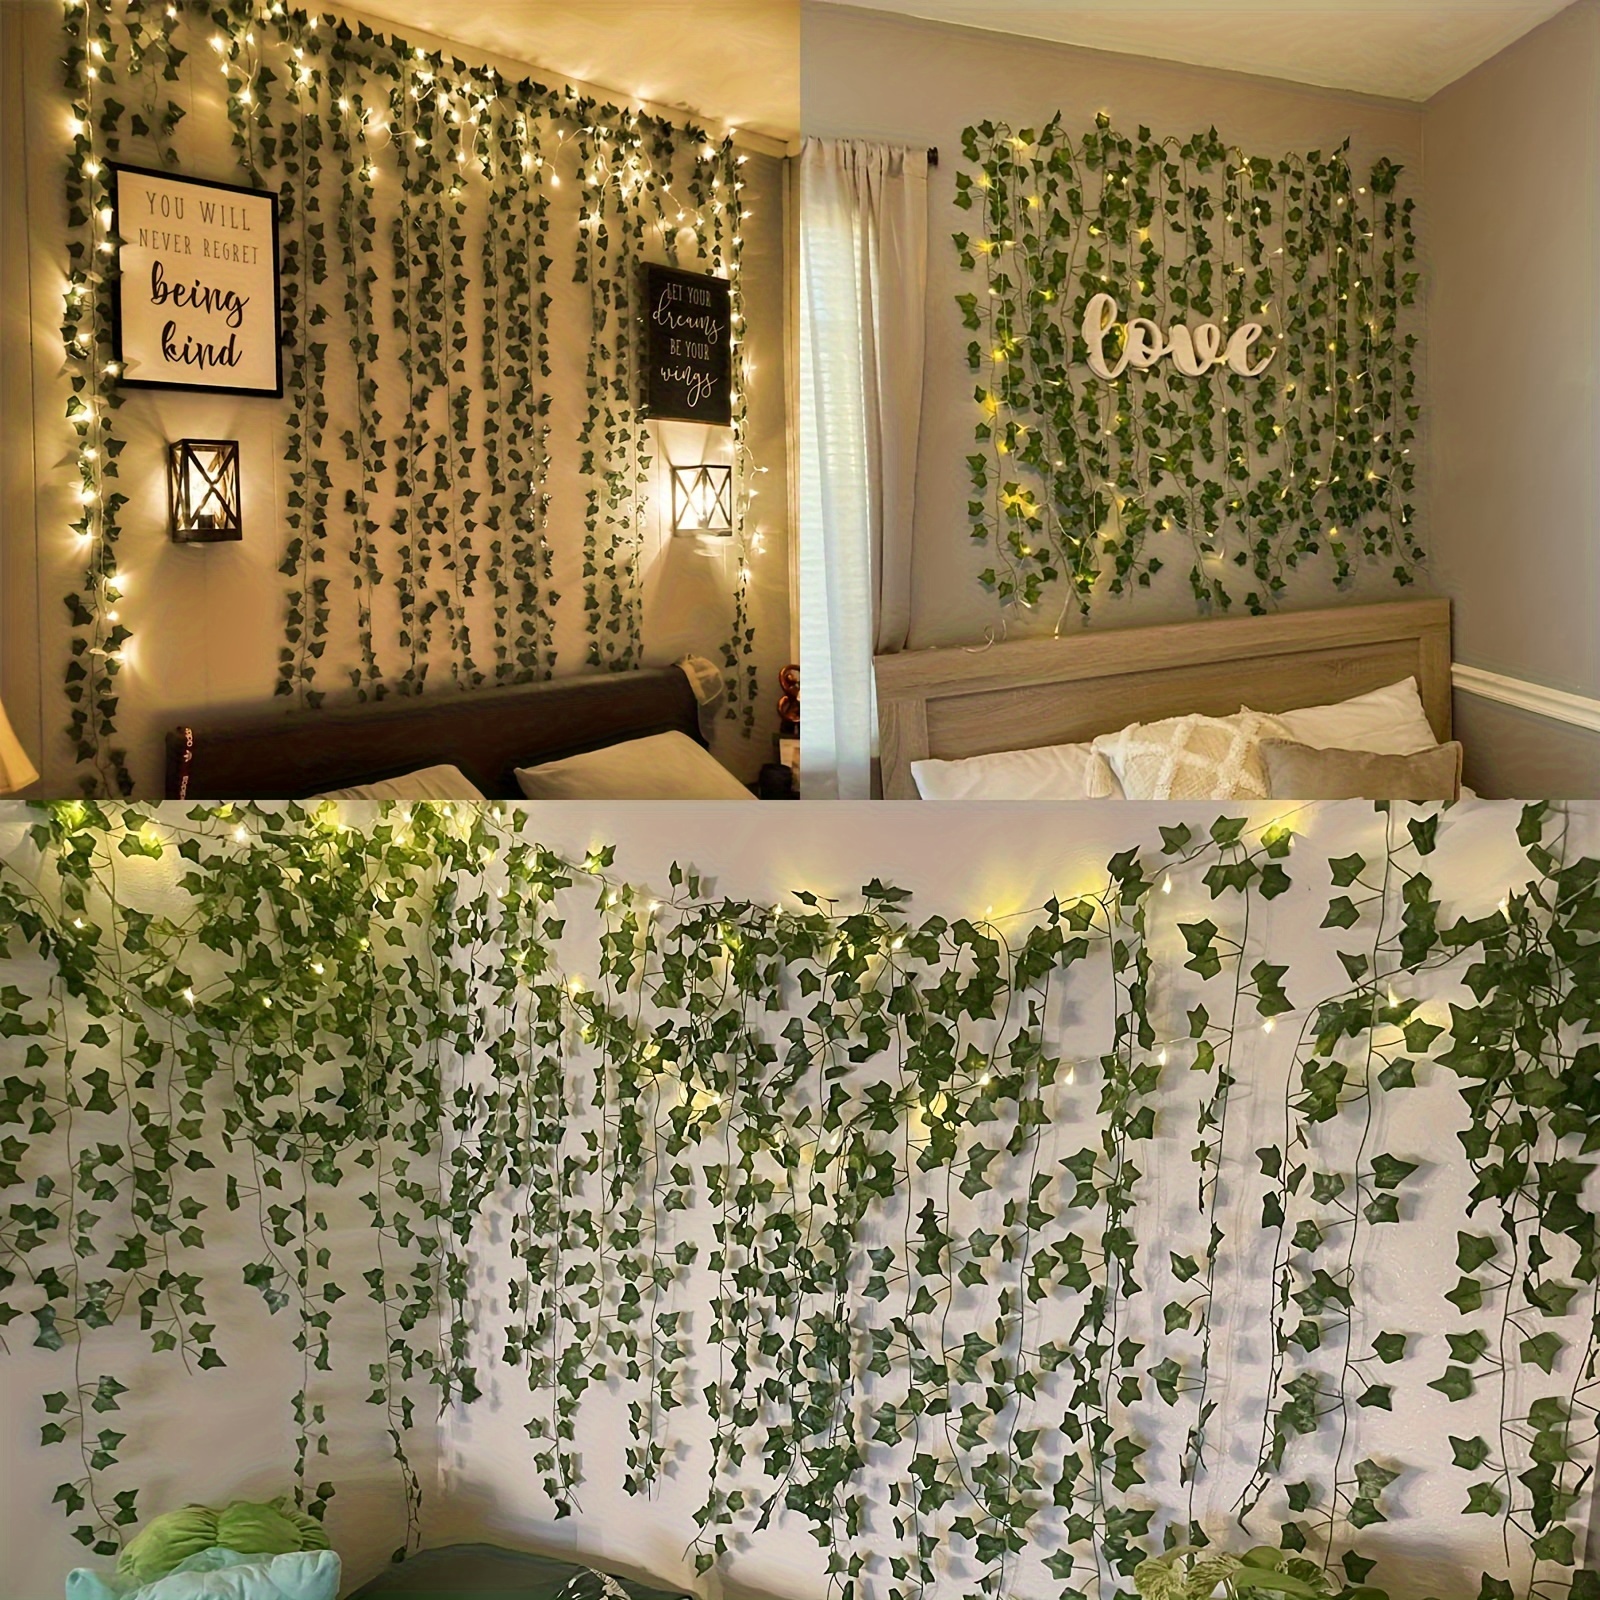 Artificial Ivy Green Garland, Fake Vine Hanging Plant Background Suitable  for Room Bedroom Wall Decoration, Green Leaves for Jungle Theme Party